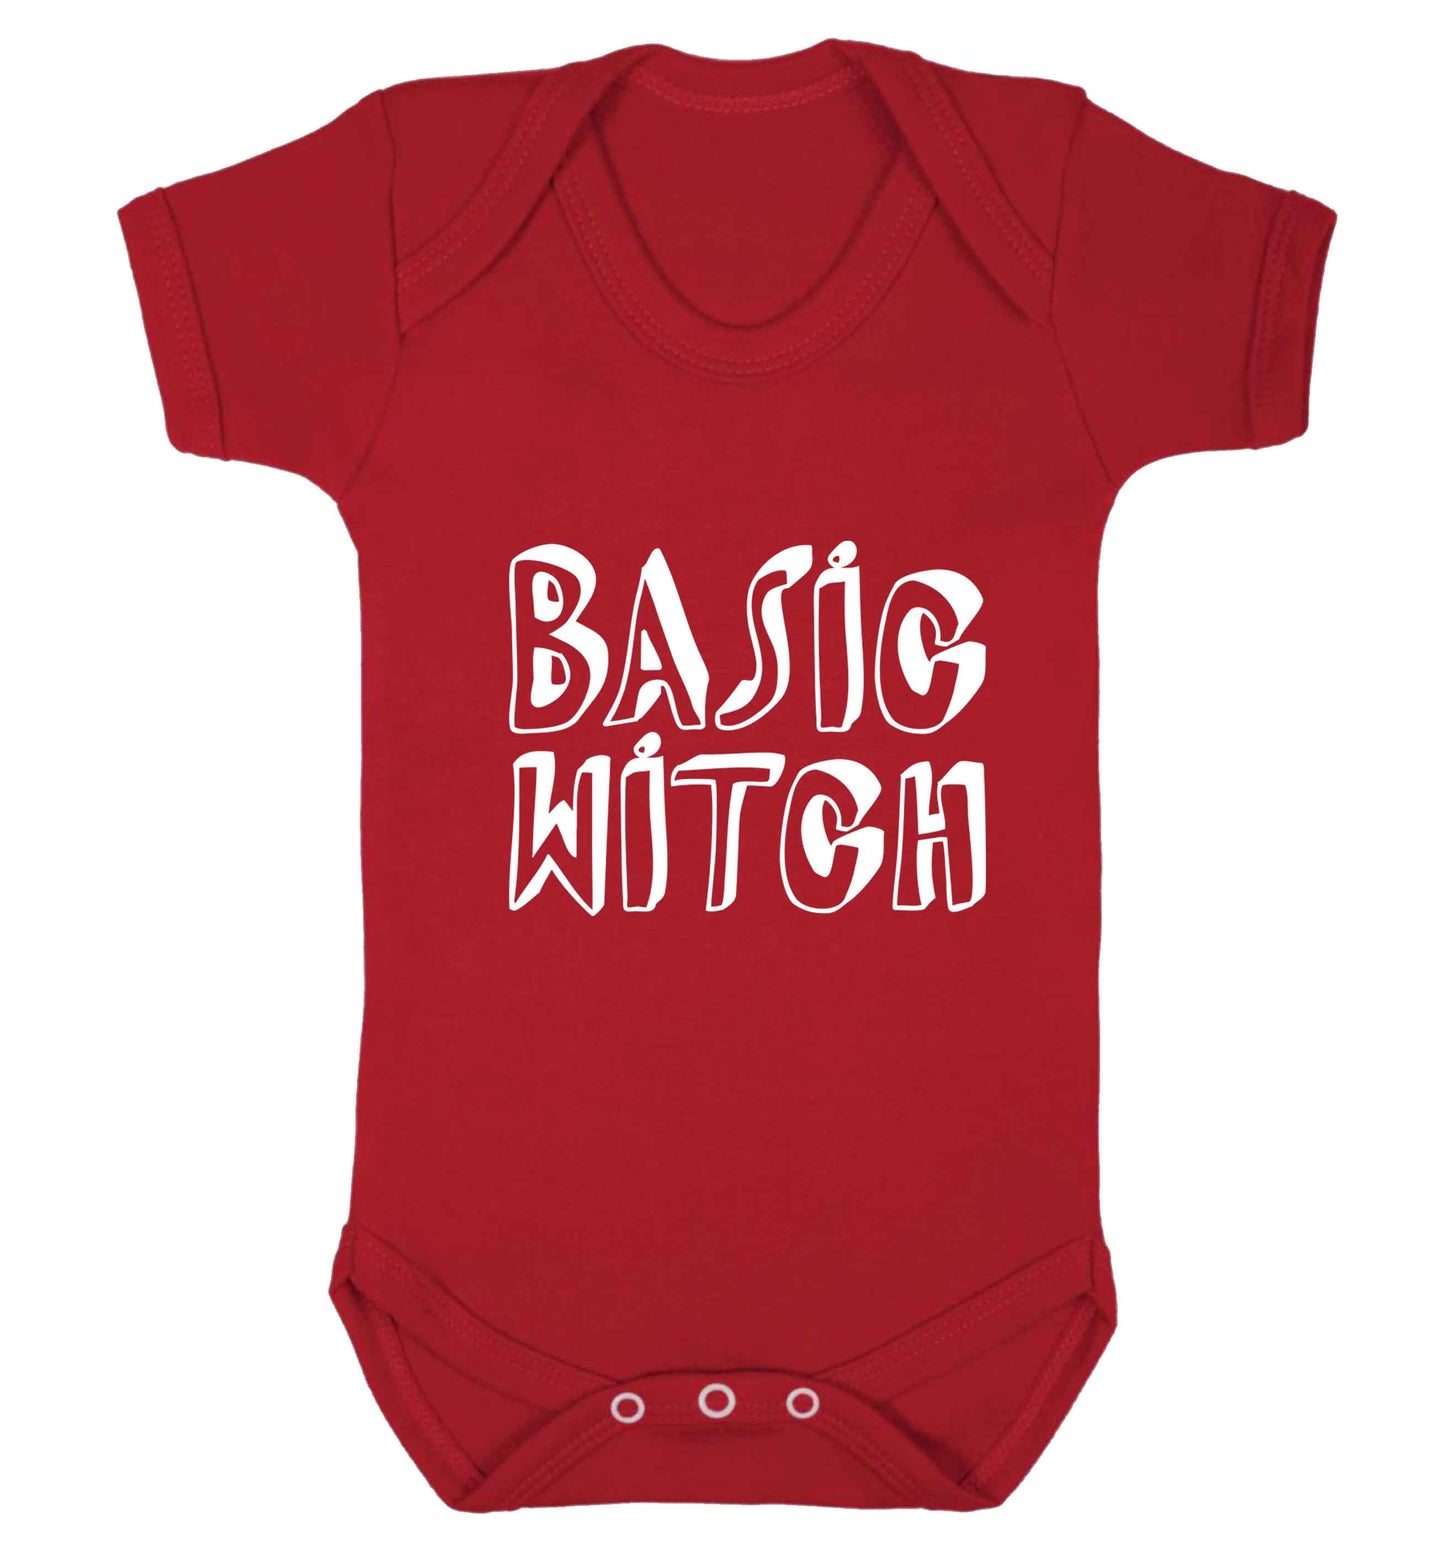 Basic witch baby vest red 18-24 months